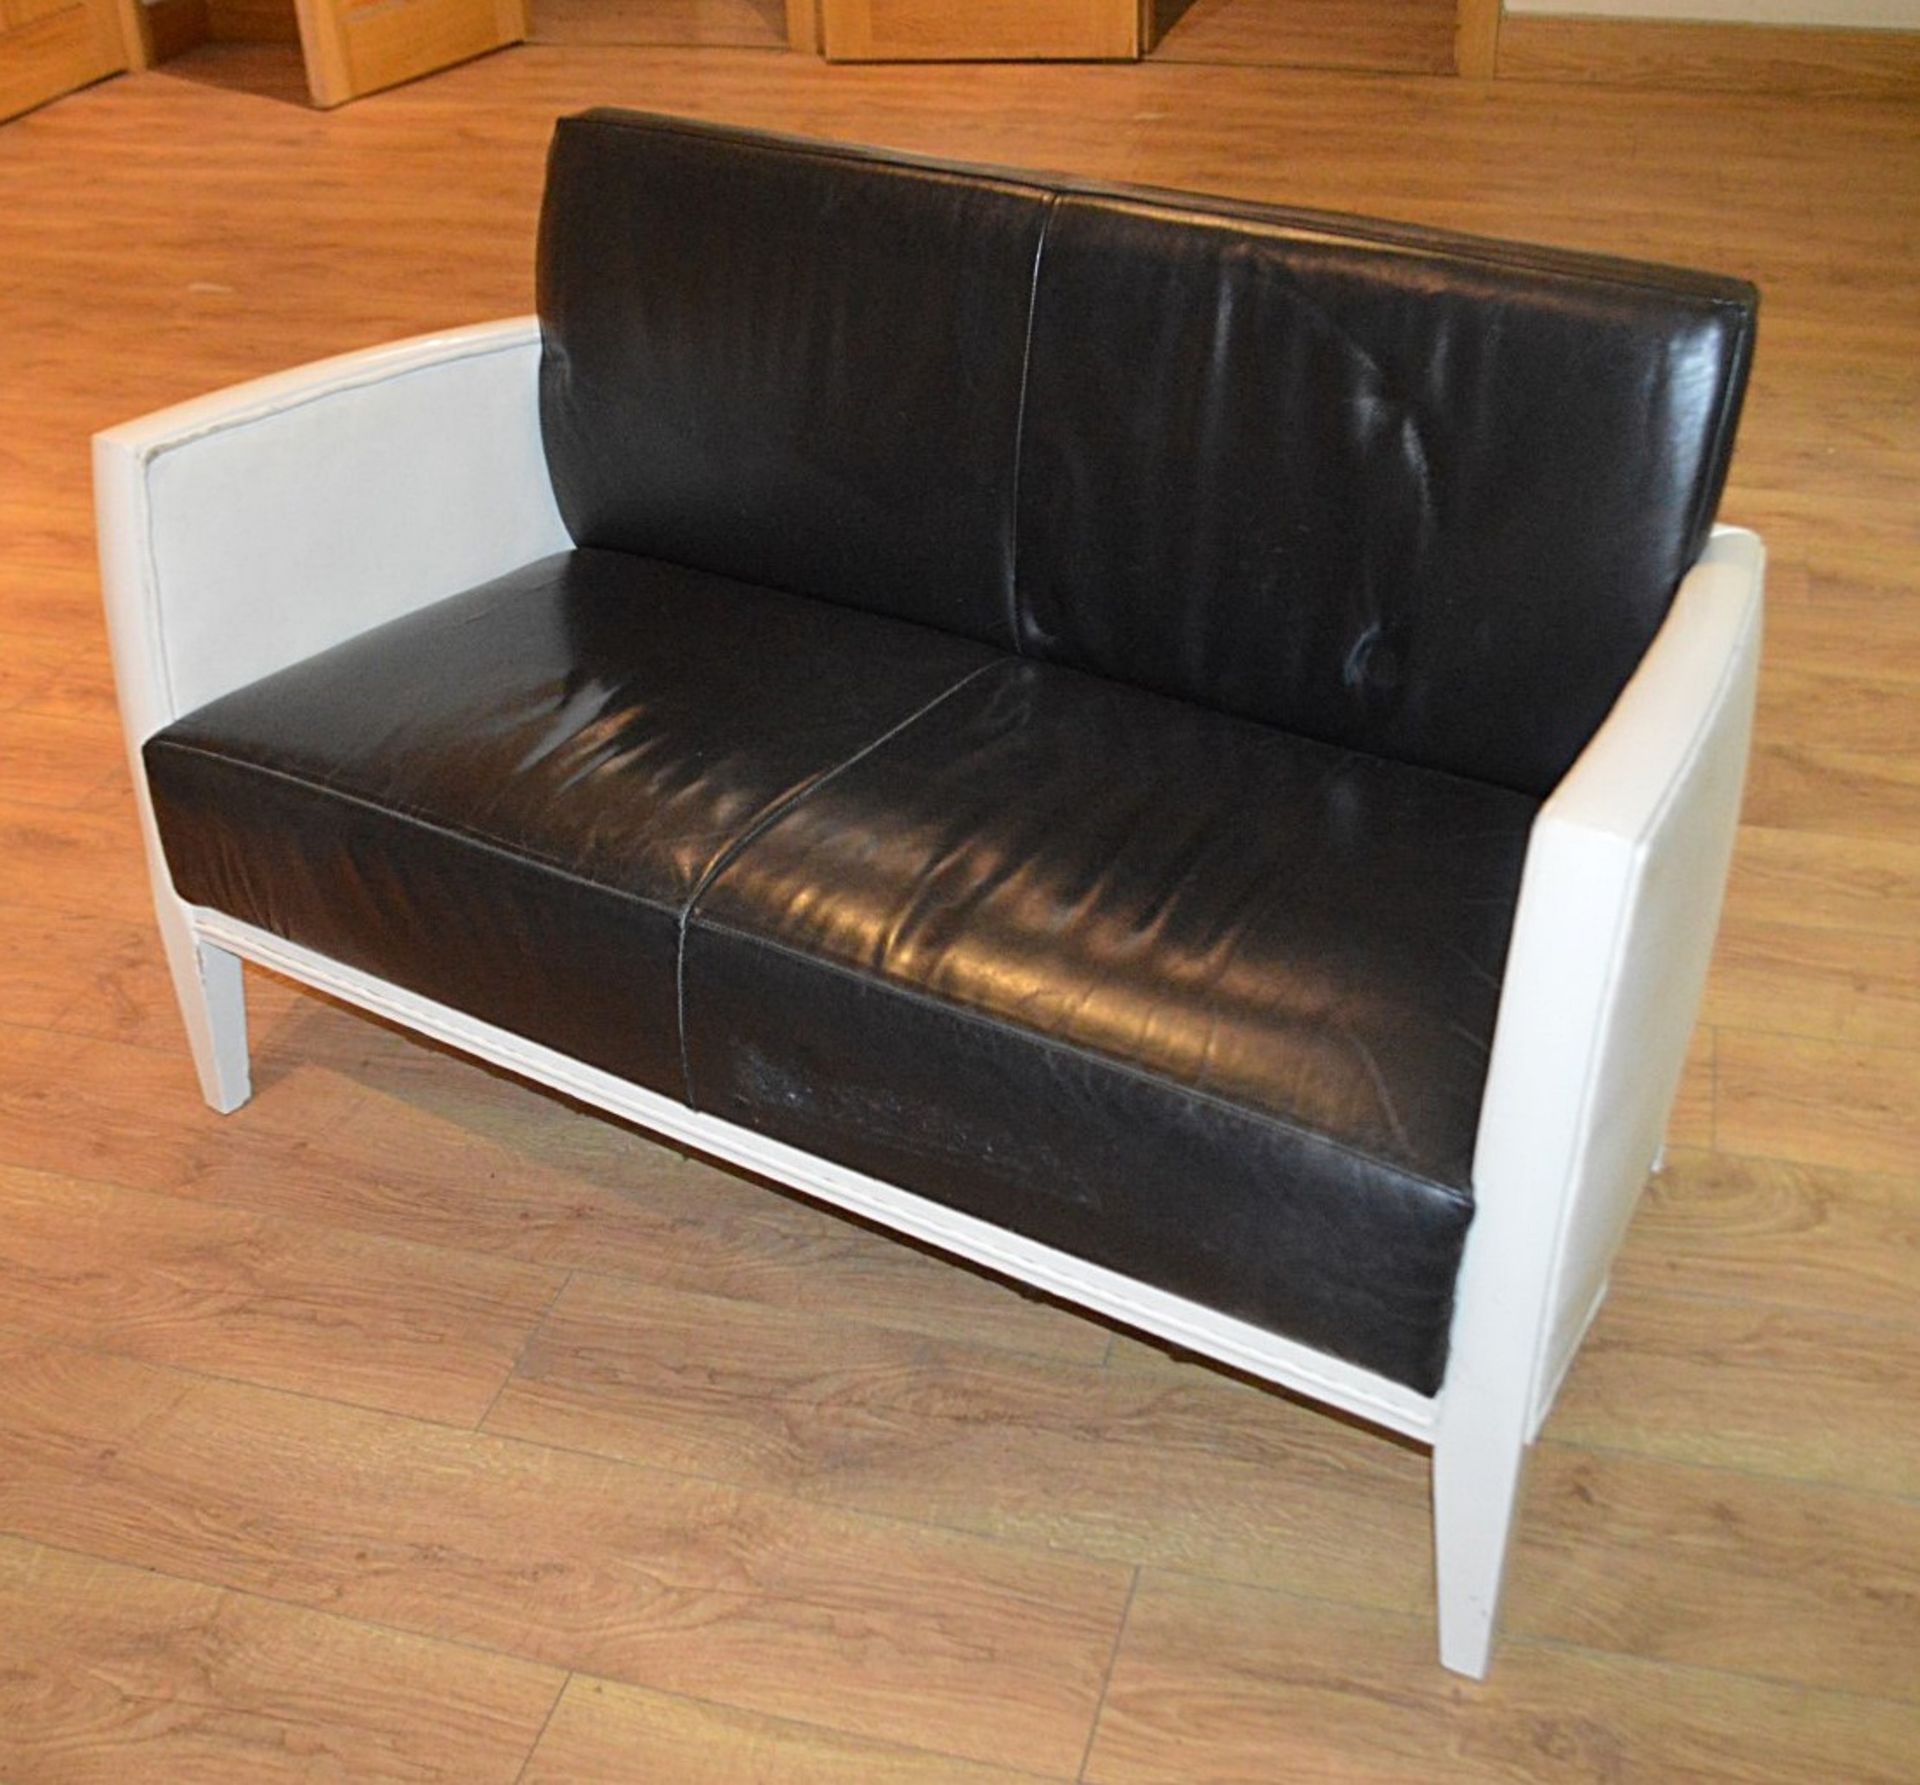 1 x Stylish Commercial Leather Upholstered 2-Seater Sofa With A High-Gloss Patent-Style Finish On